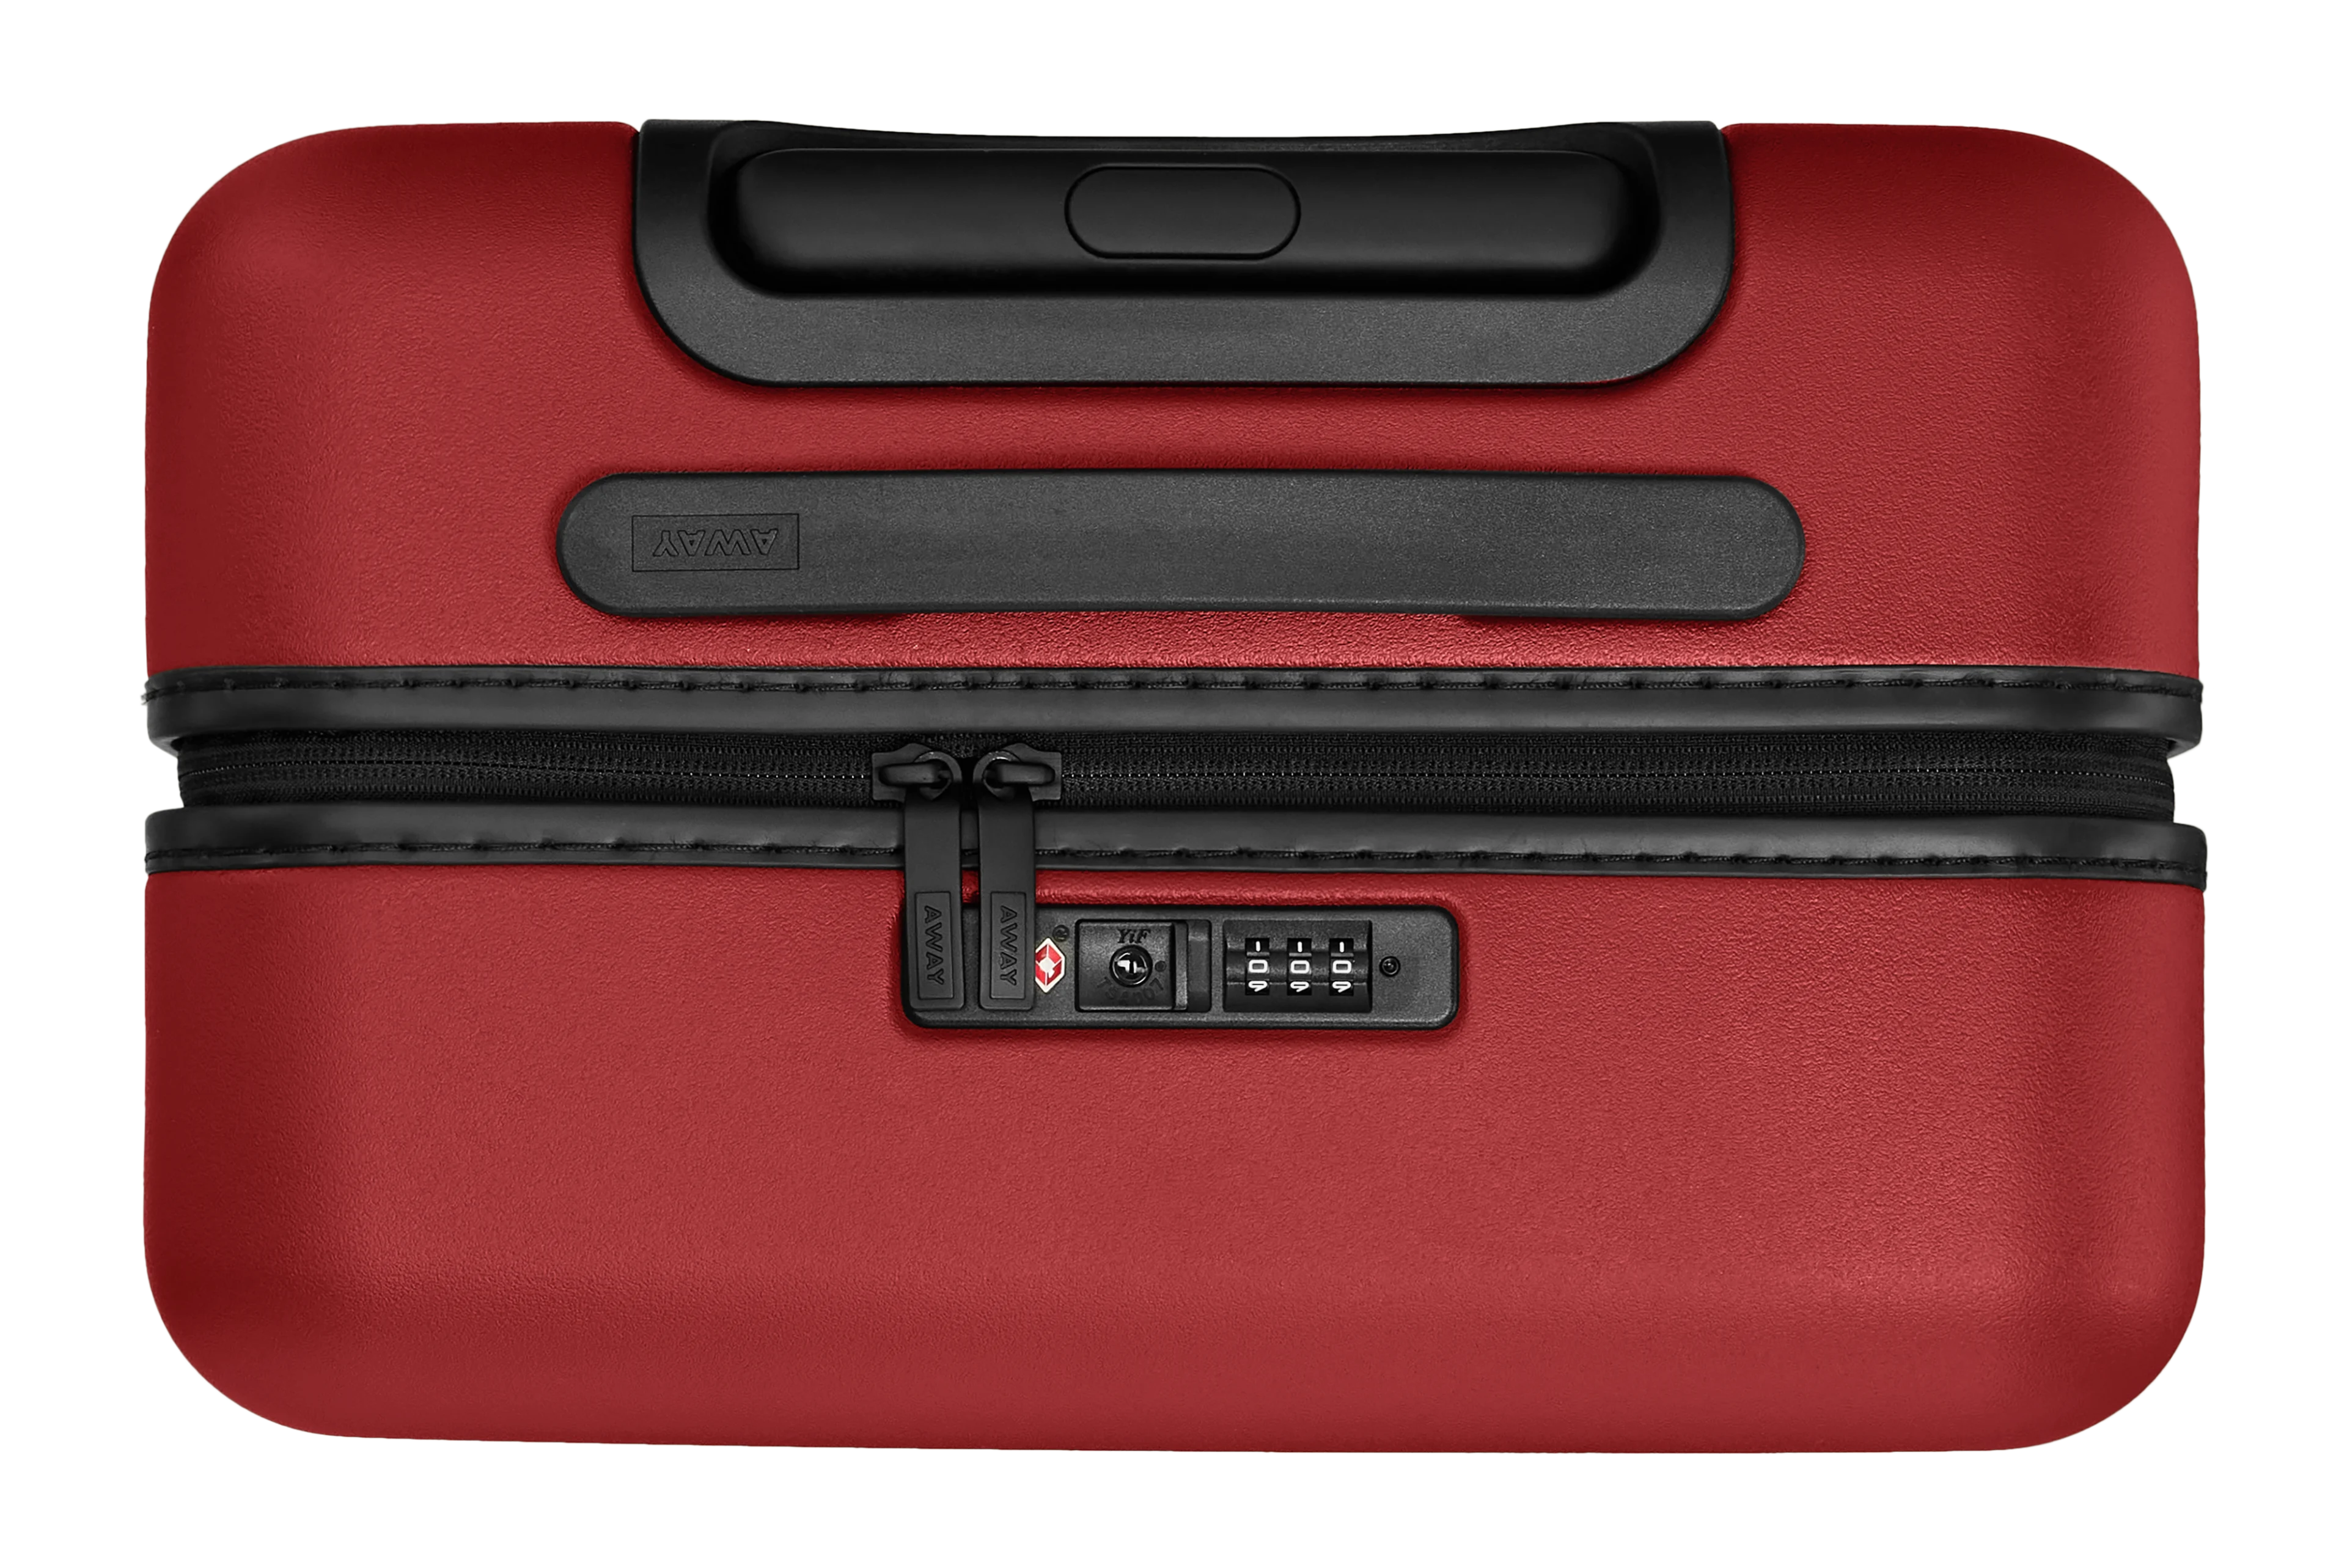 The Bigger Carry-On in Tango Red